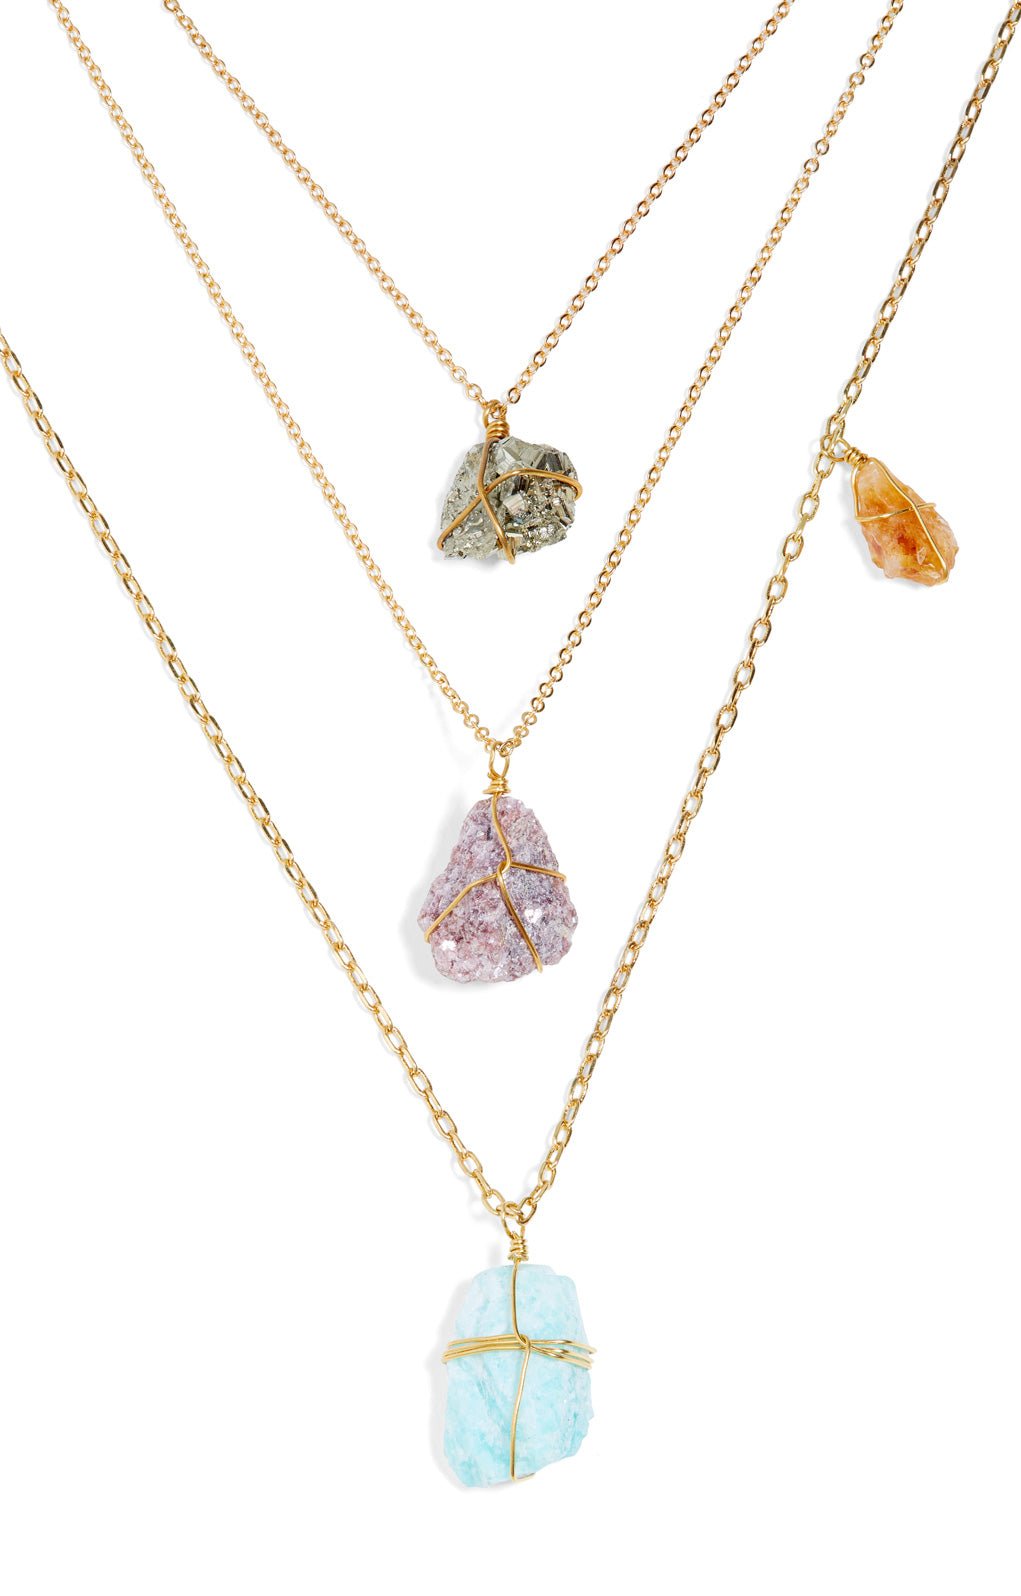 Perfect Healing Crystal Delicate Layered Necklace - Ariana Ost